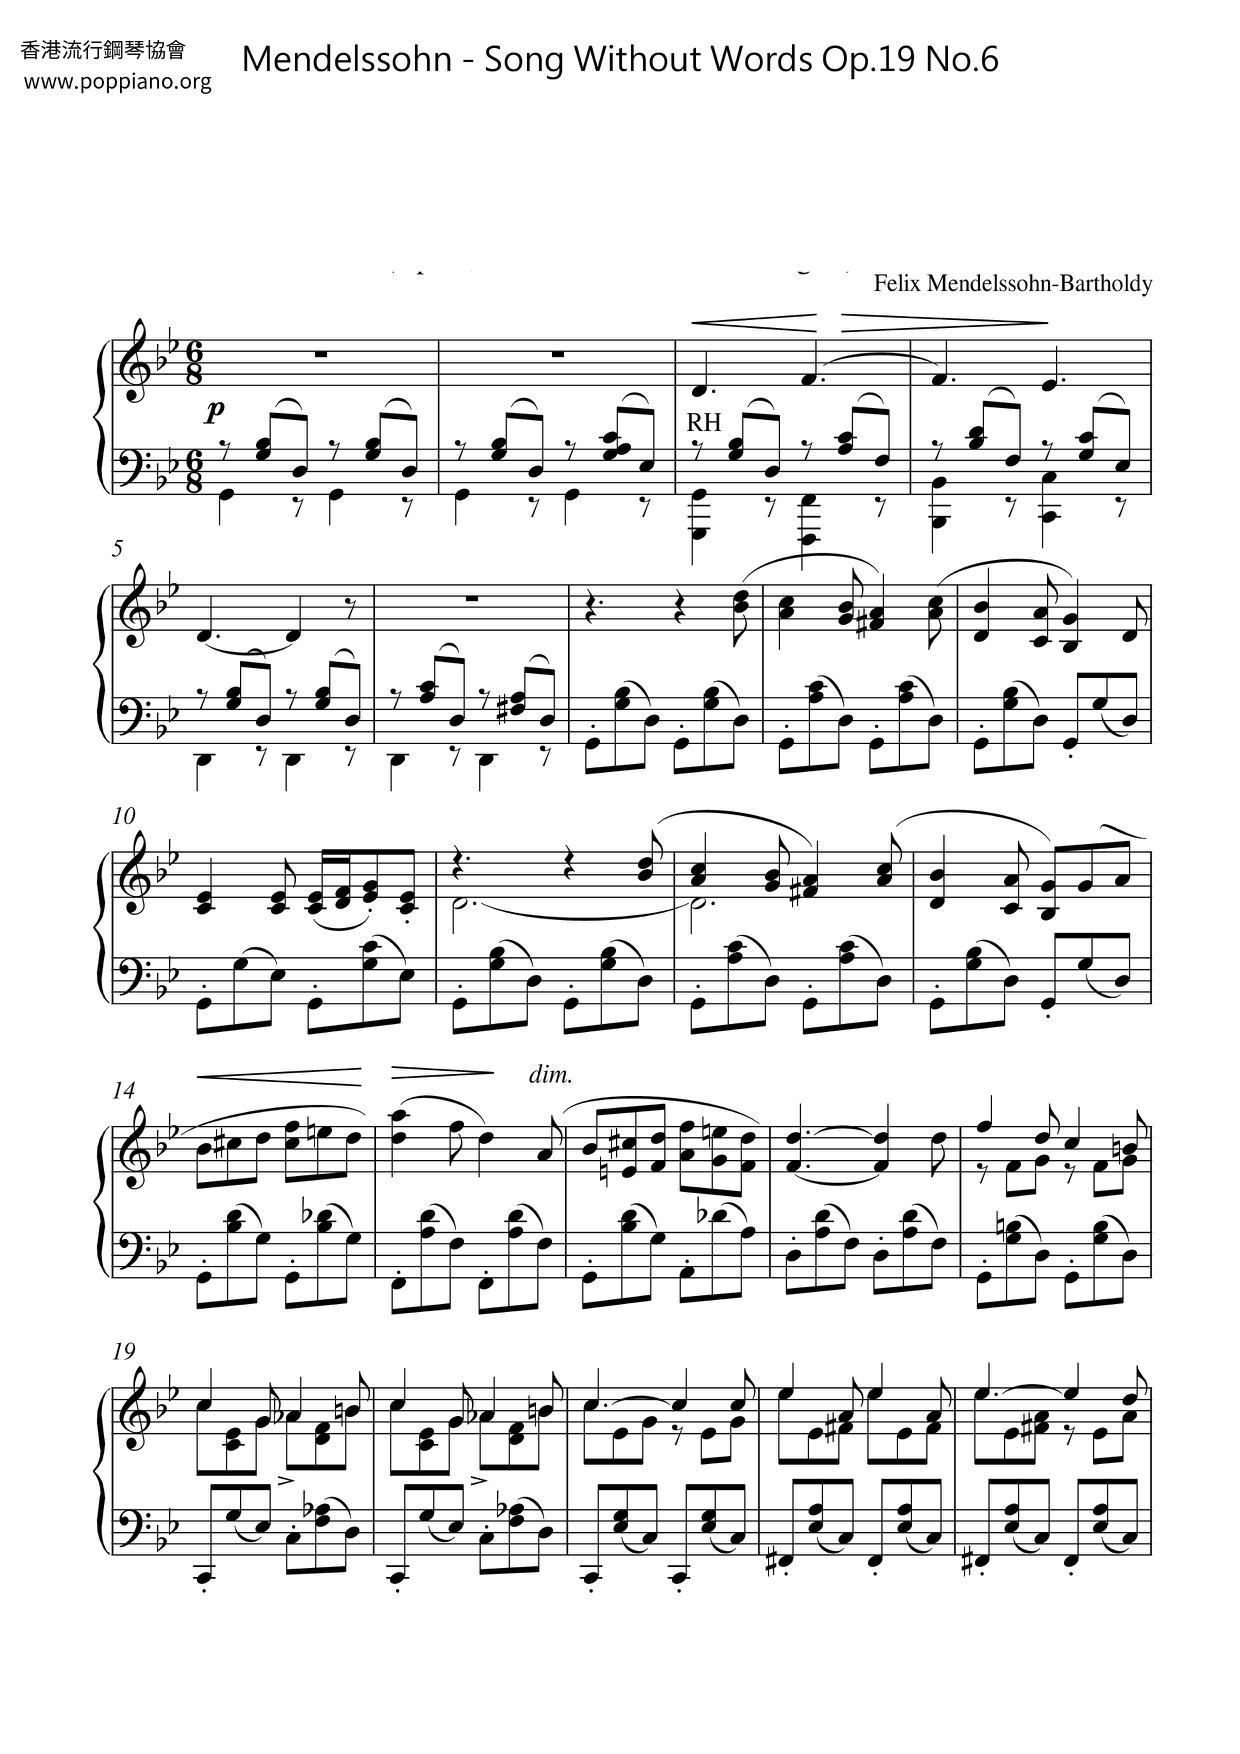 Song Without Words Op.19 No.6, Venetian Boat Song Score